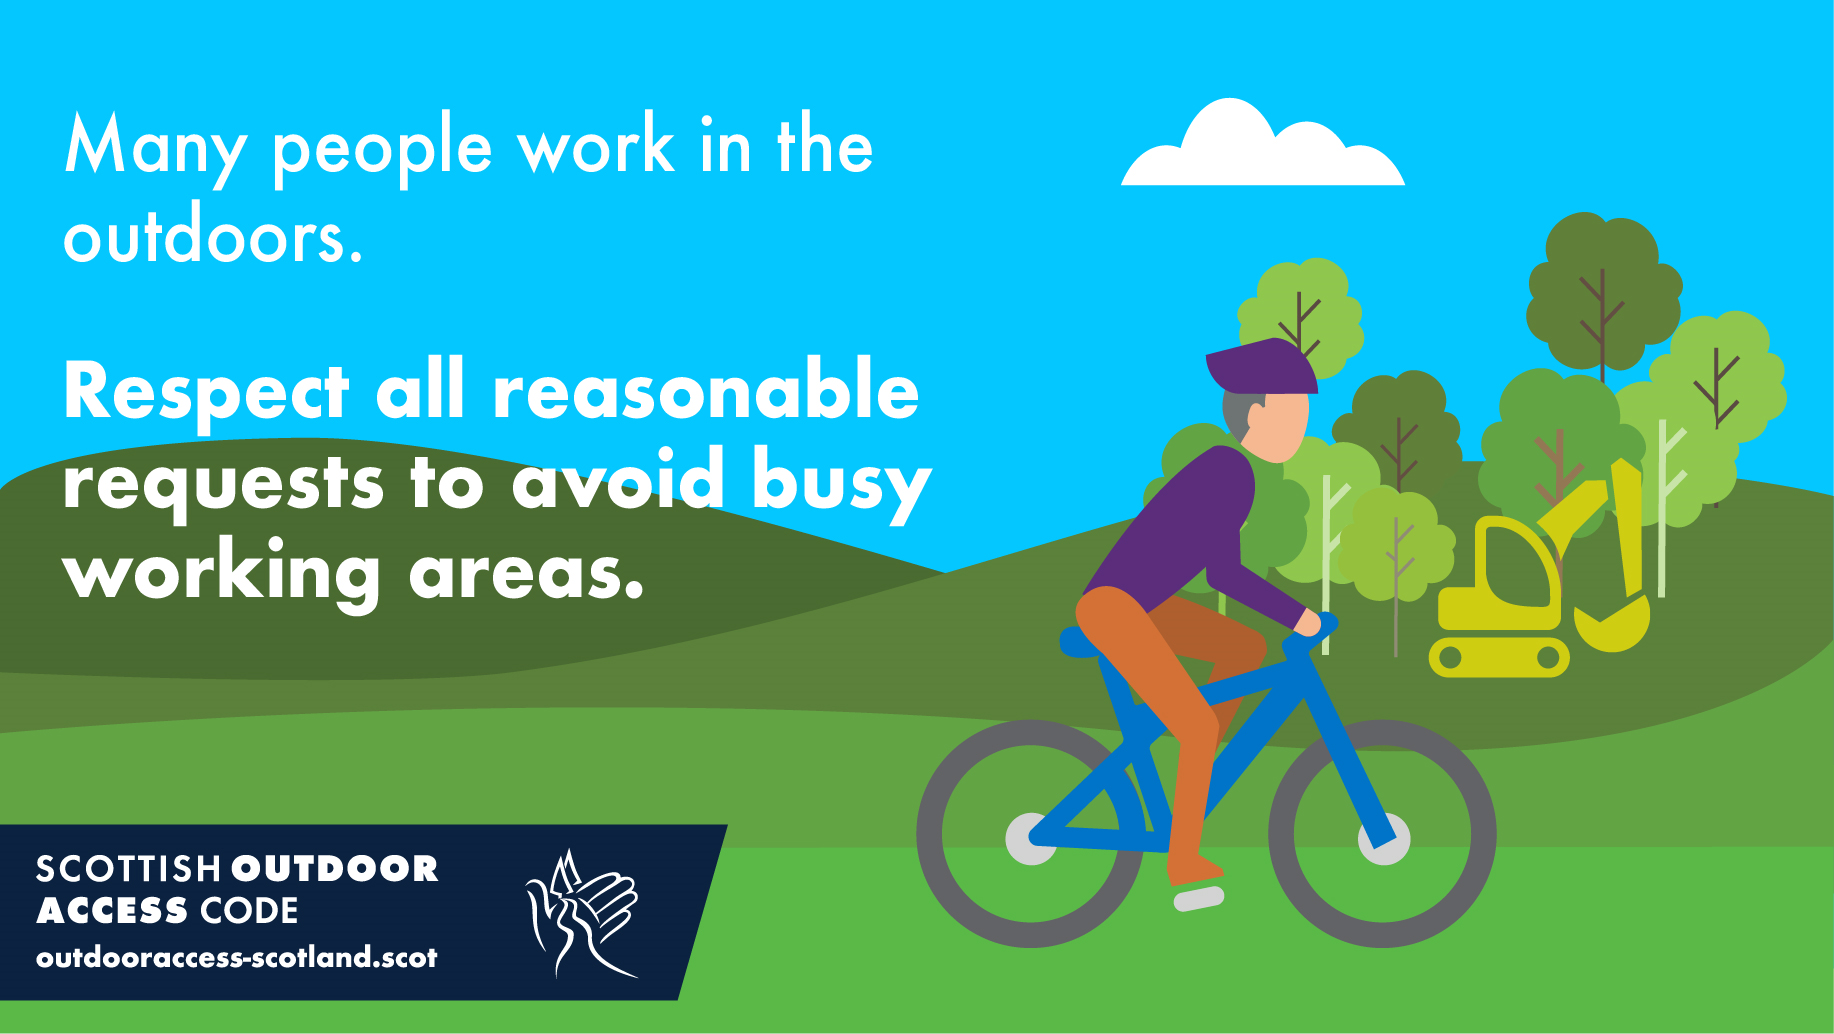 Many people work in the outdoors. Respect all reasonable requests to avoid busy working areas.